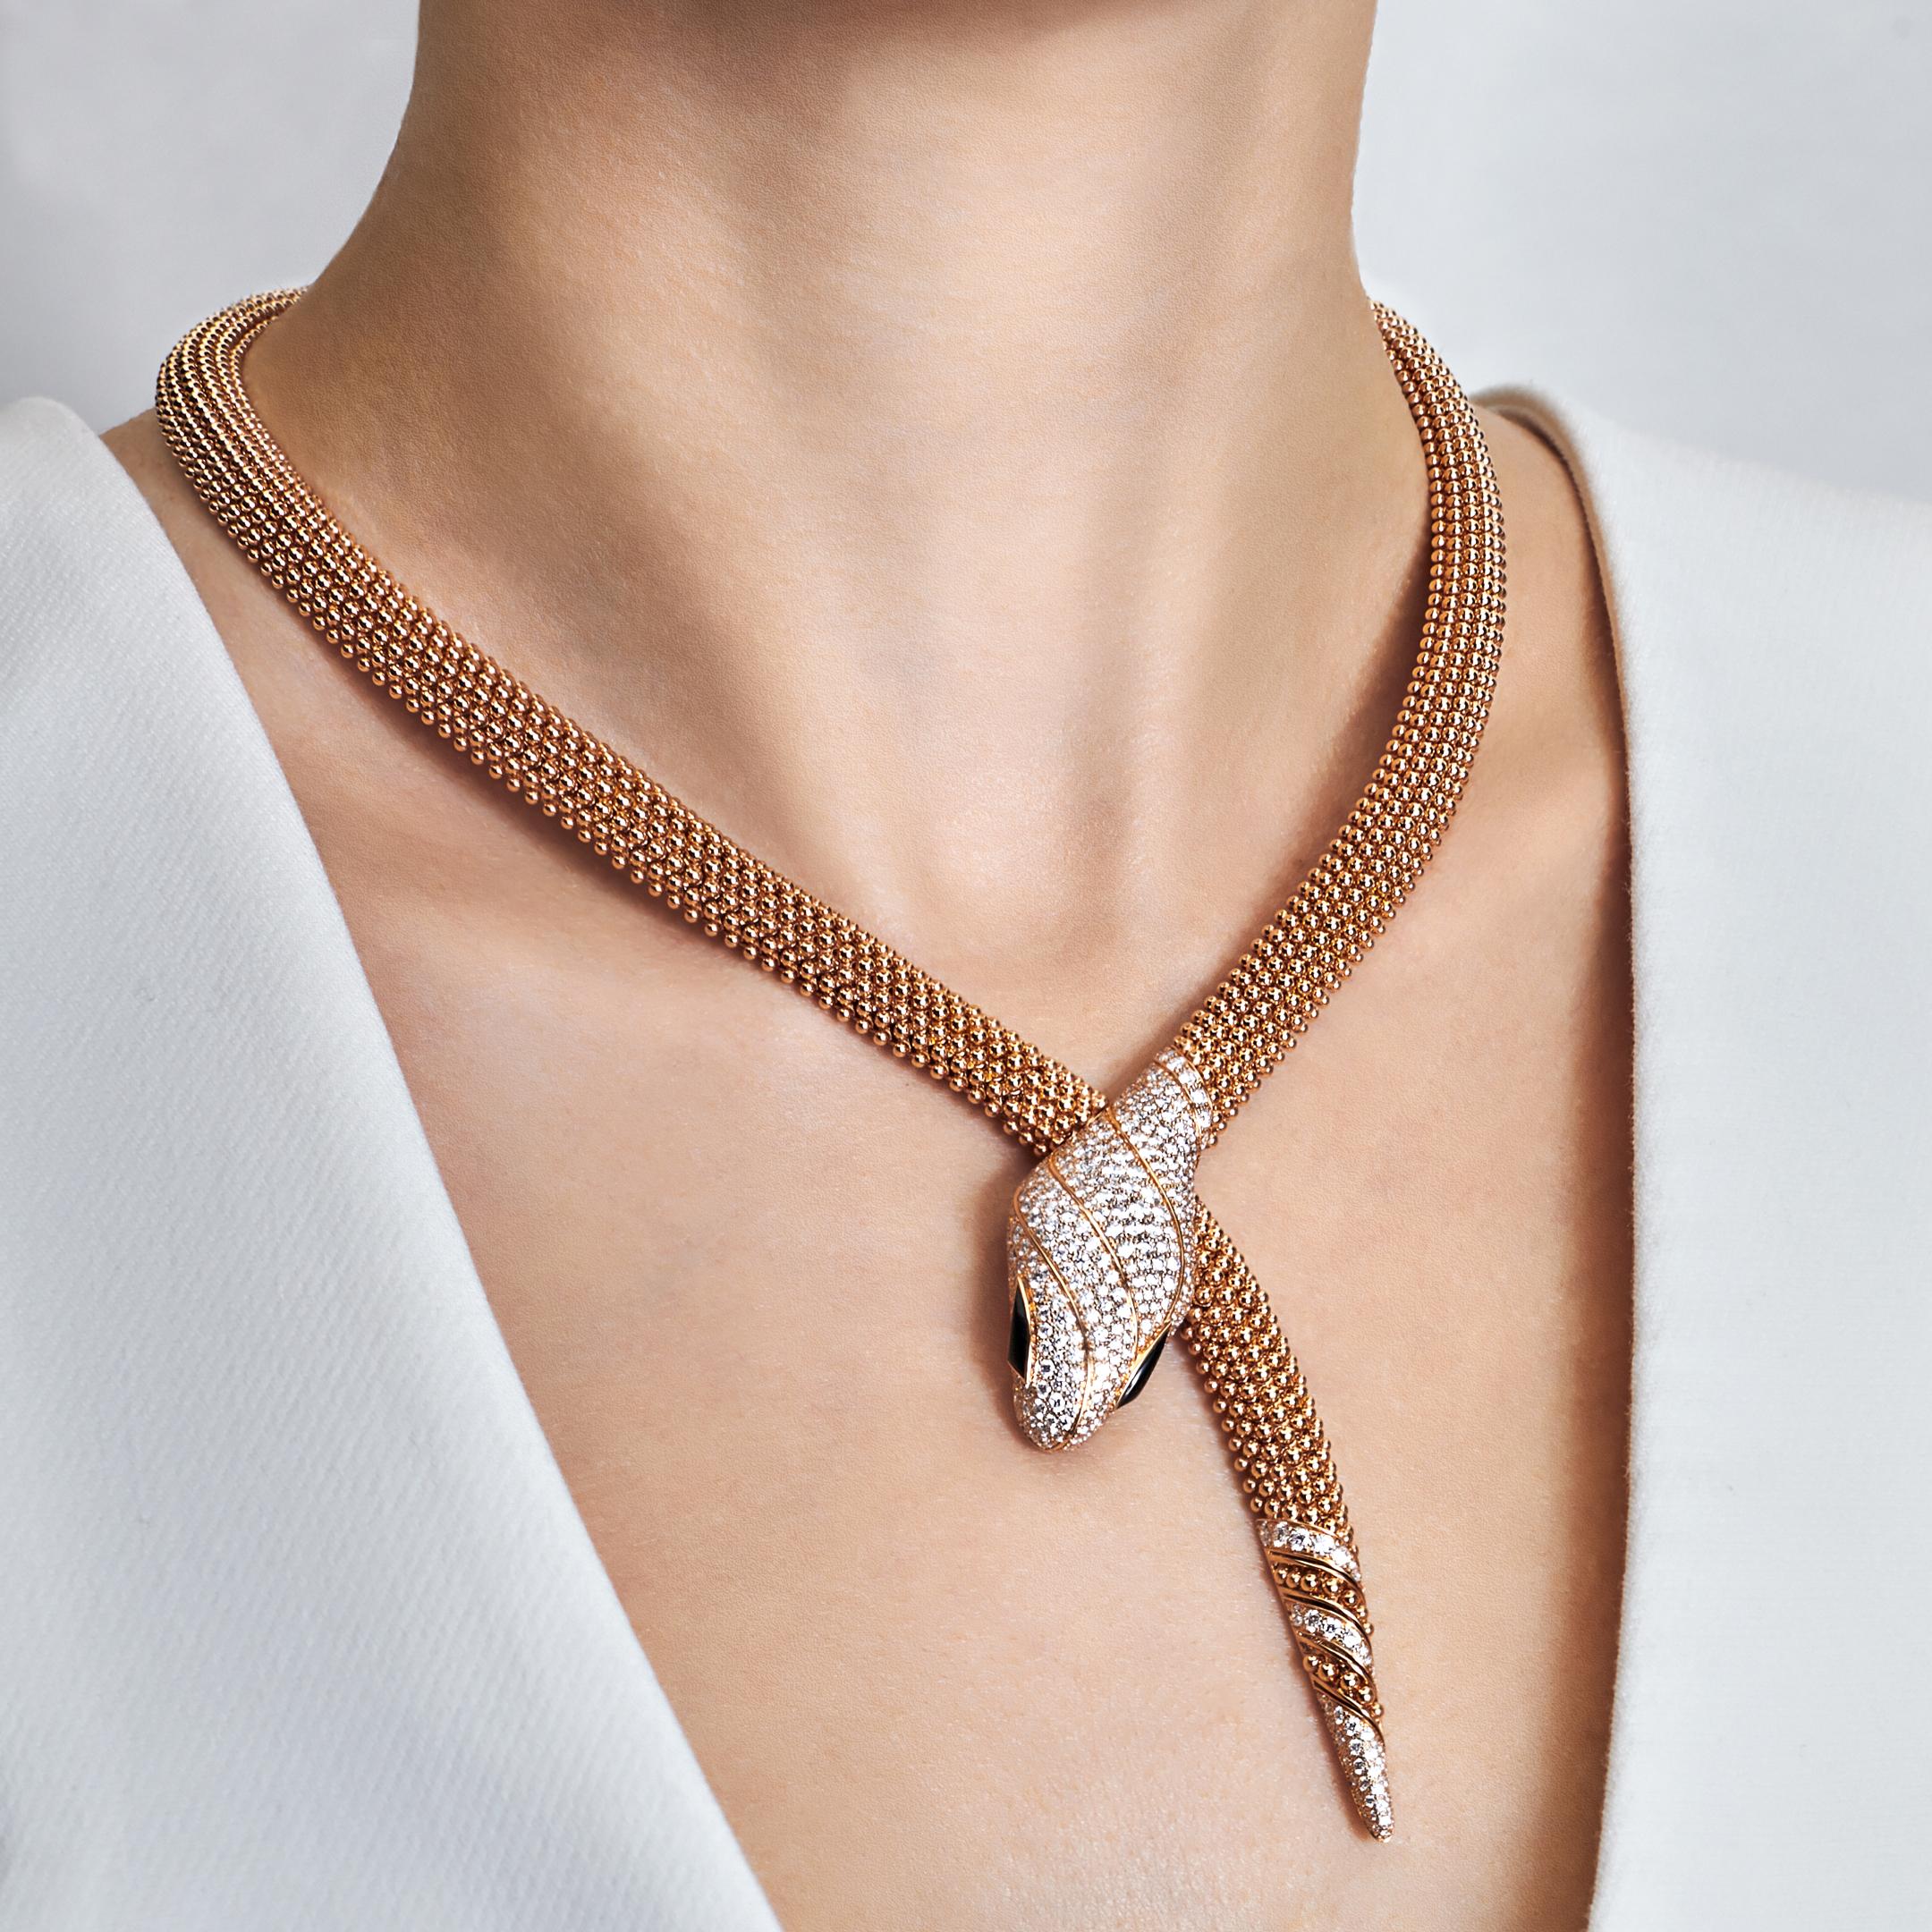 A distinctive interpretation of Bulgari’s icon of endless metamorphosis and unstoppable transformation, the Serpenti 18-karat rose gold necklace represents a captivating blend between audacious craftsmanship, iconic design and boundless creativity.